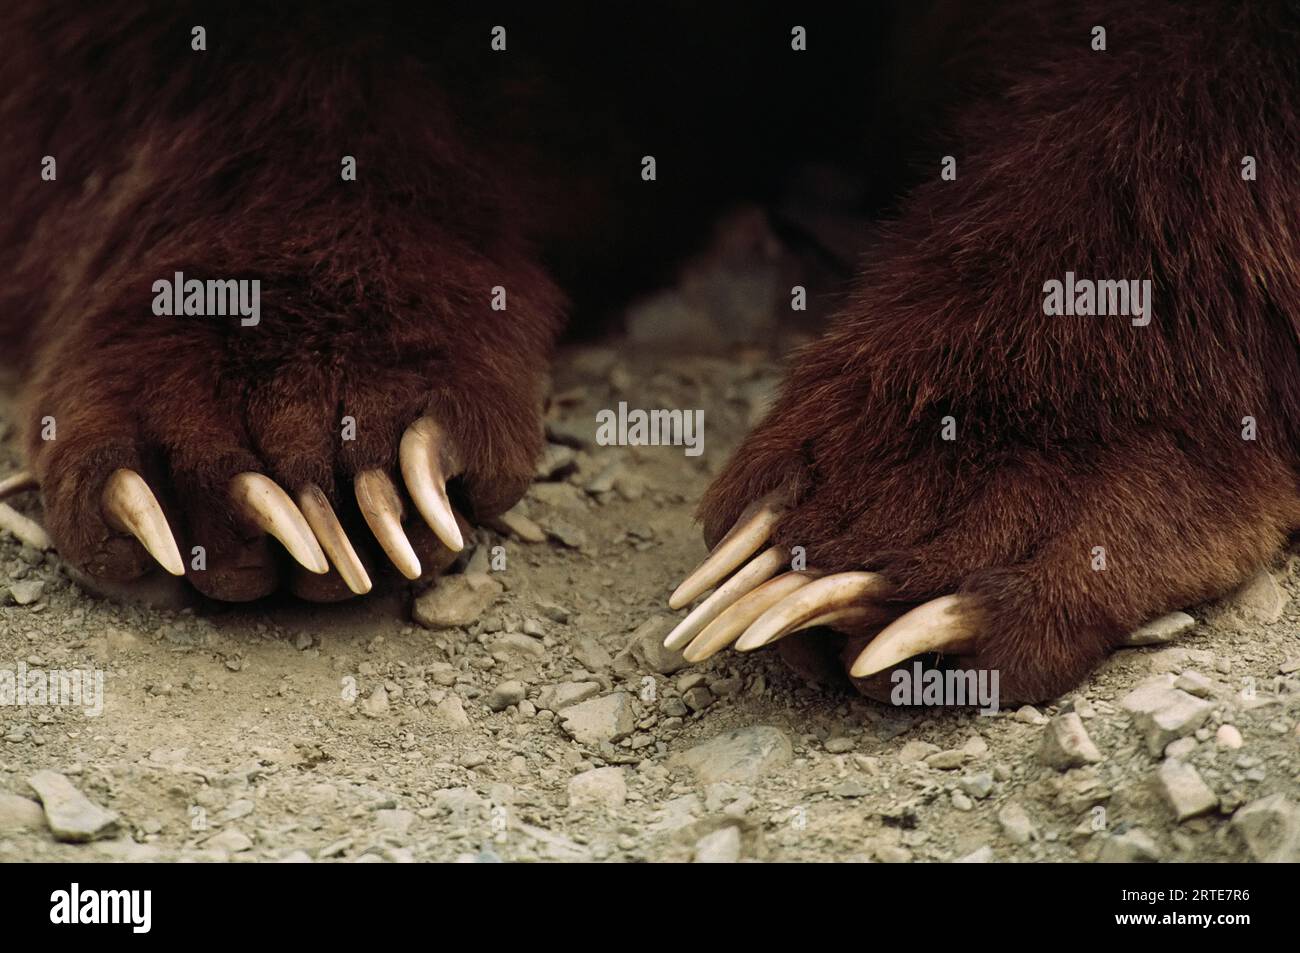 Close view of a Grizzly bear's (Ursus arctos horribilis) claws; Larsen Bay, Alaska, United States of America Stock Photo